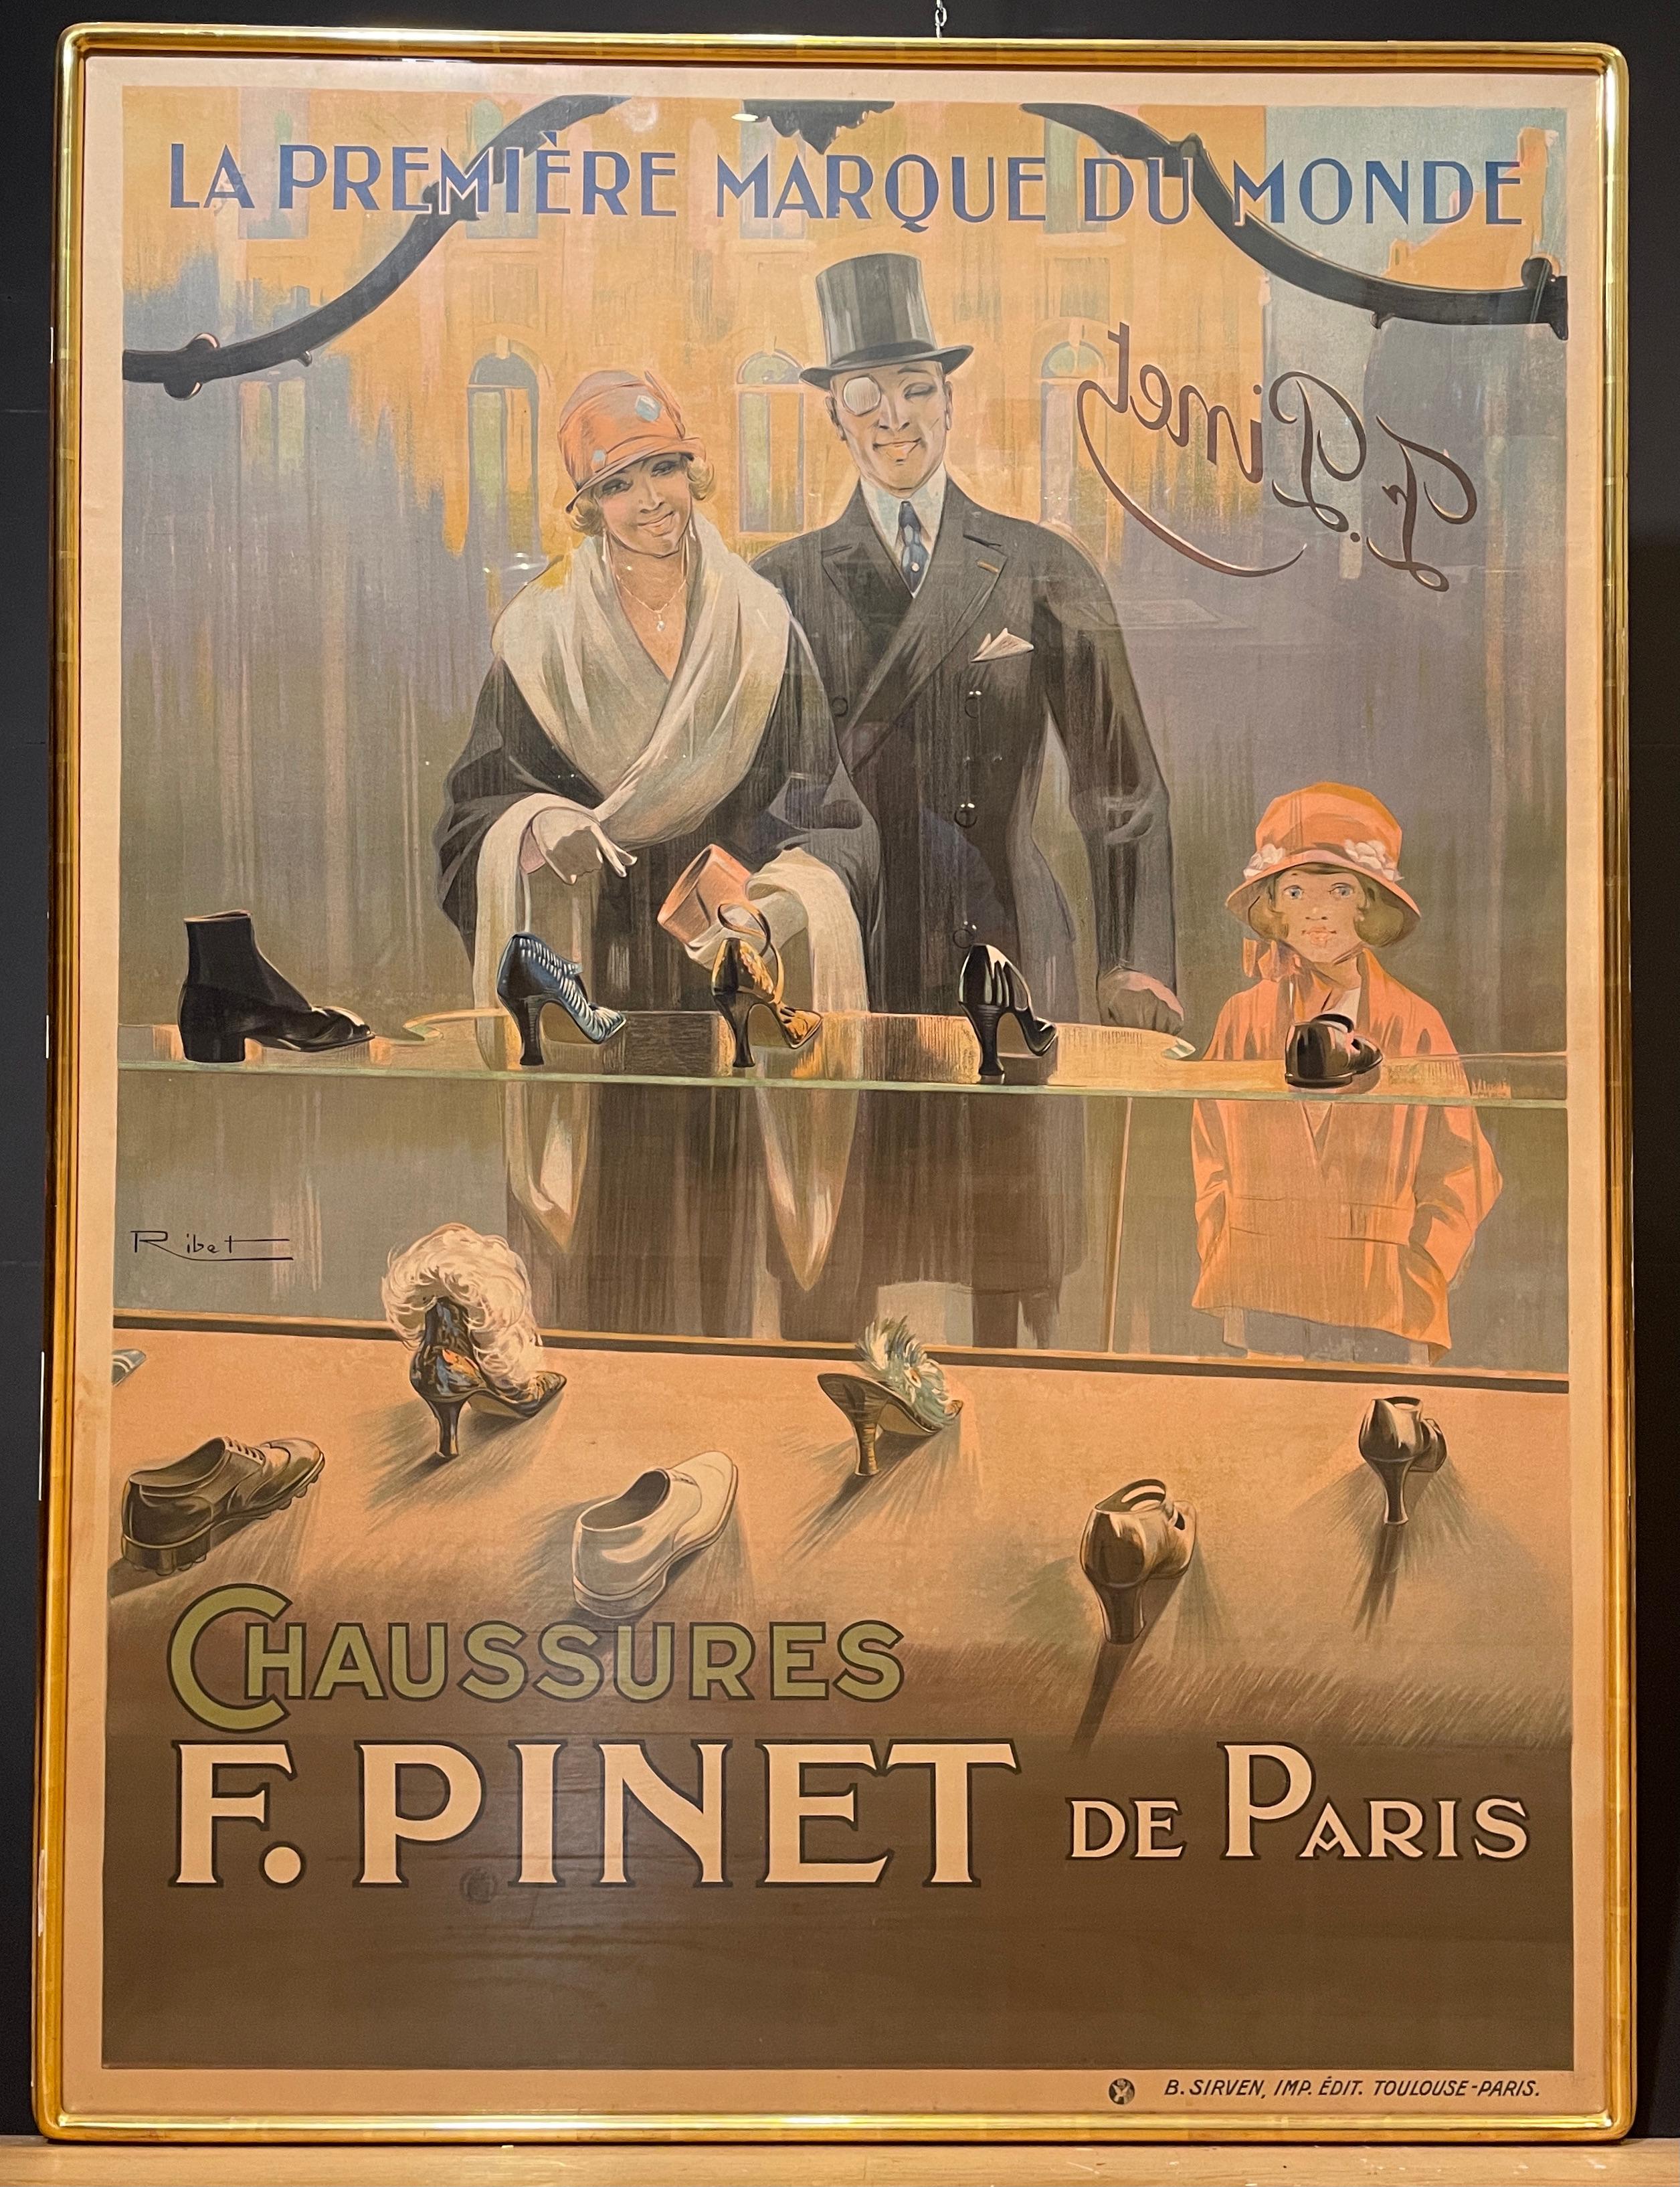 Shopping for shoes in Paris with the family? Gilt framed antique French Art Deco advertising poster, 